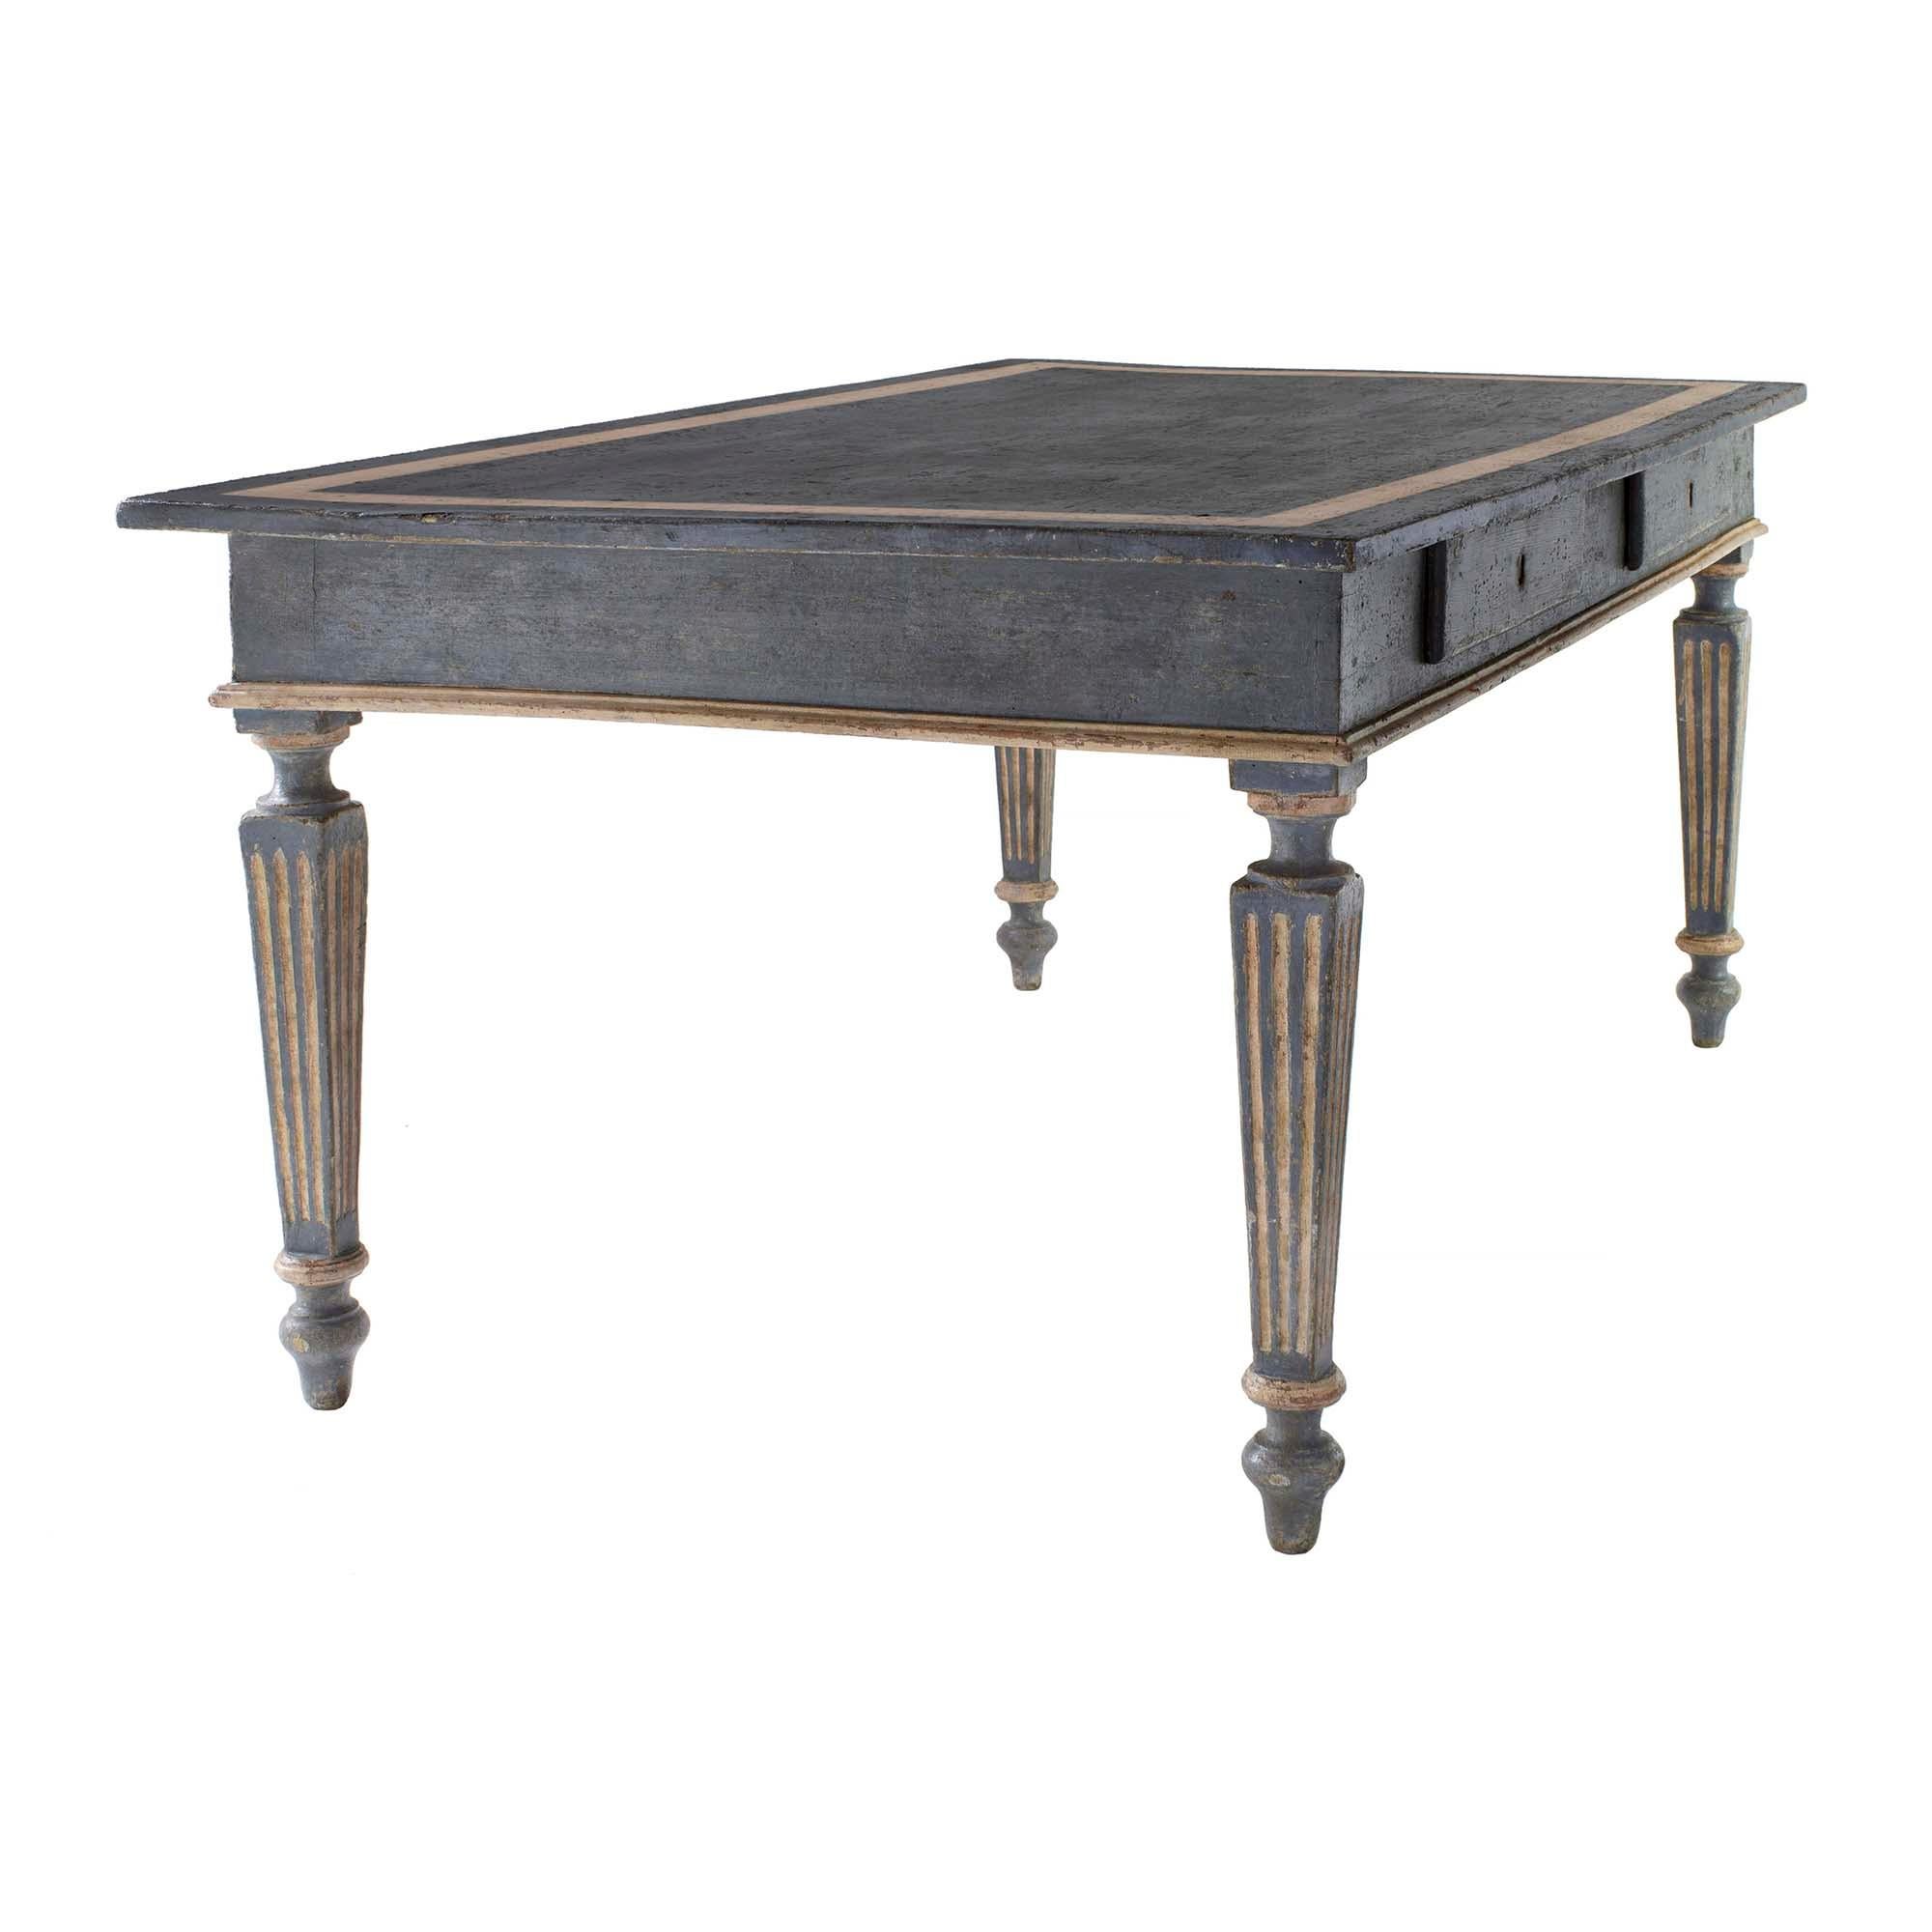 Italian 19th Century Blue Gray and Cream Color Patinated Tuscan Center Table In Good Condition For Sale In West Palm Beach, FL